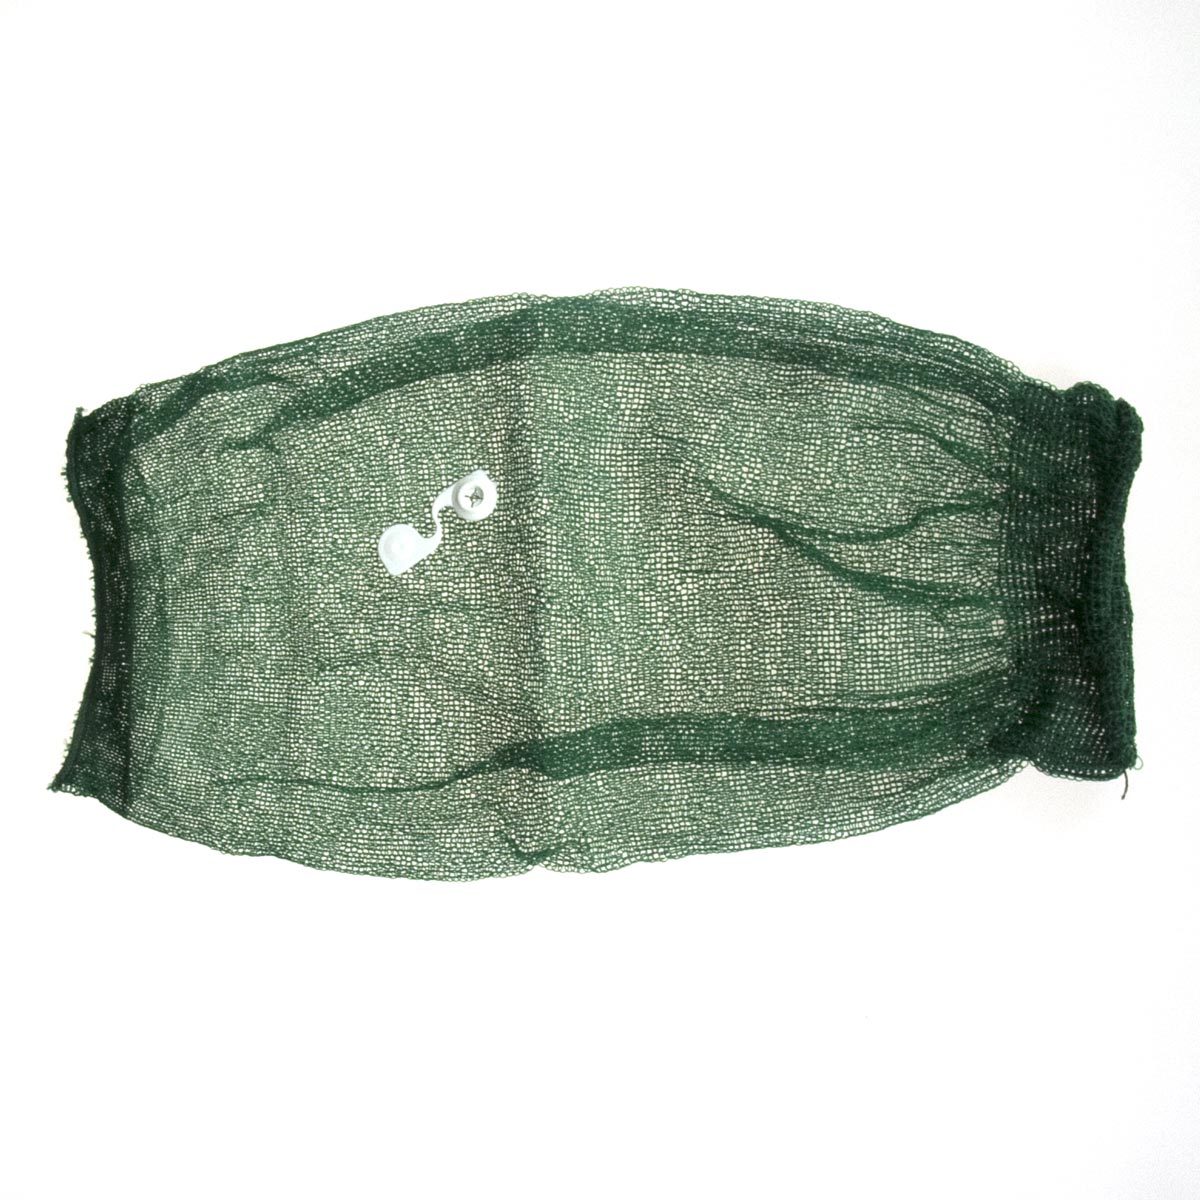 Filter sock green size up to 2 l